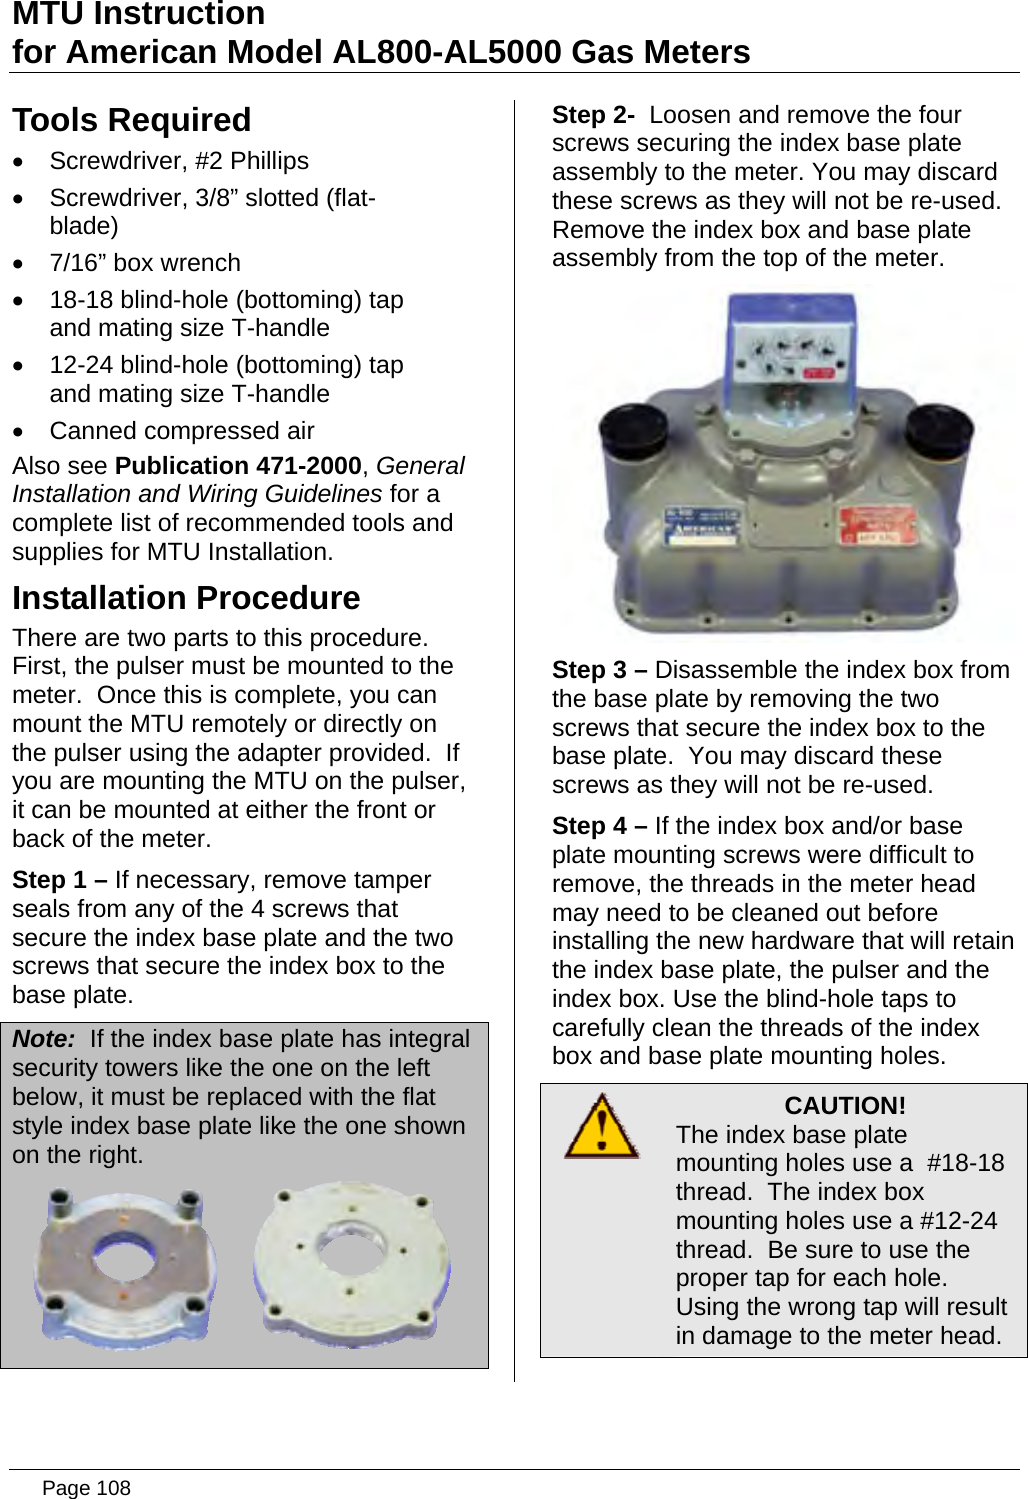 Page 108 of Aclara Technologies 09015 Transmitter for Meter Reading User Manual users manual